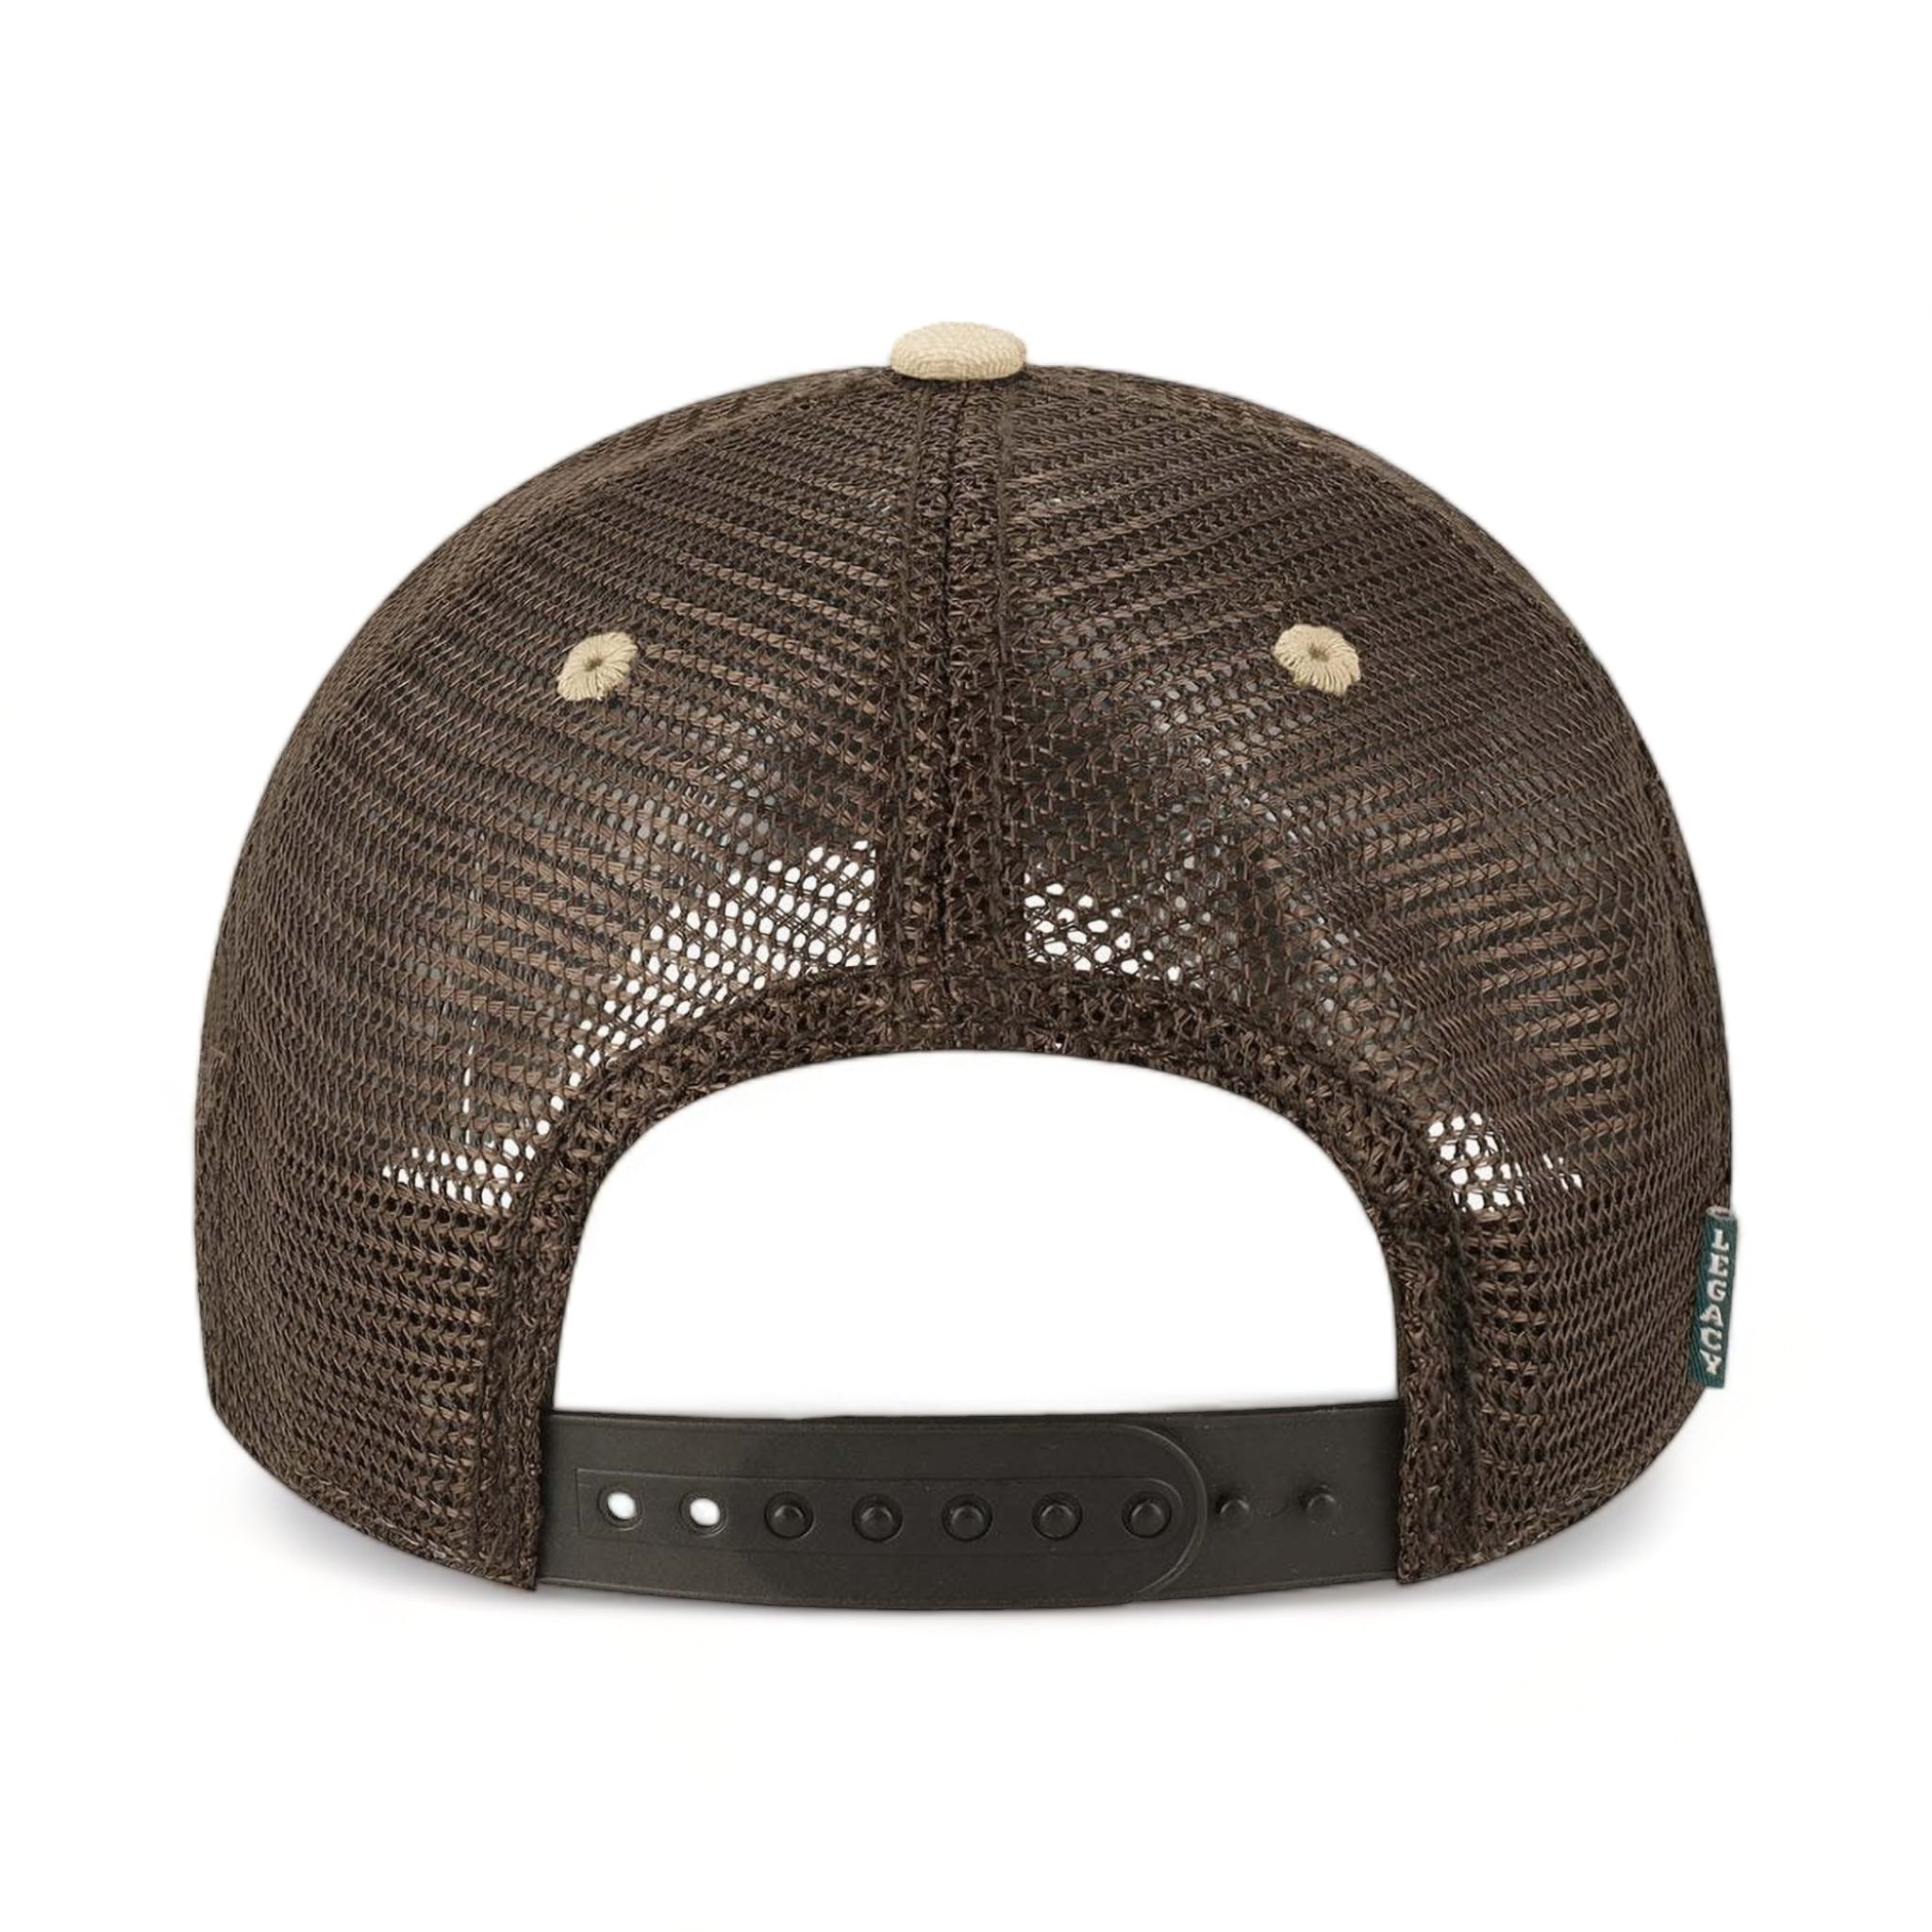 Back view of LEGACY DTA custom hat in stone, camel and brown